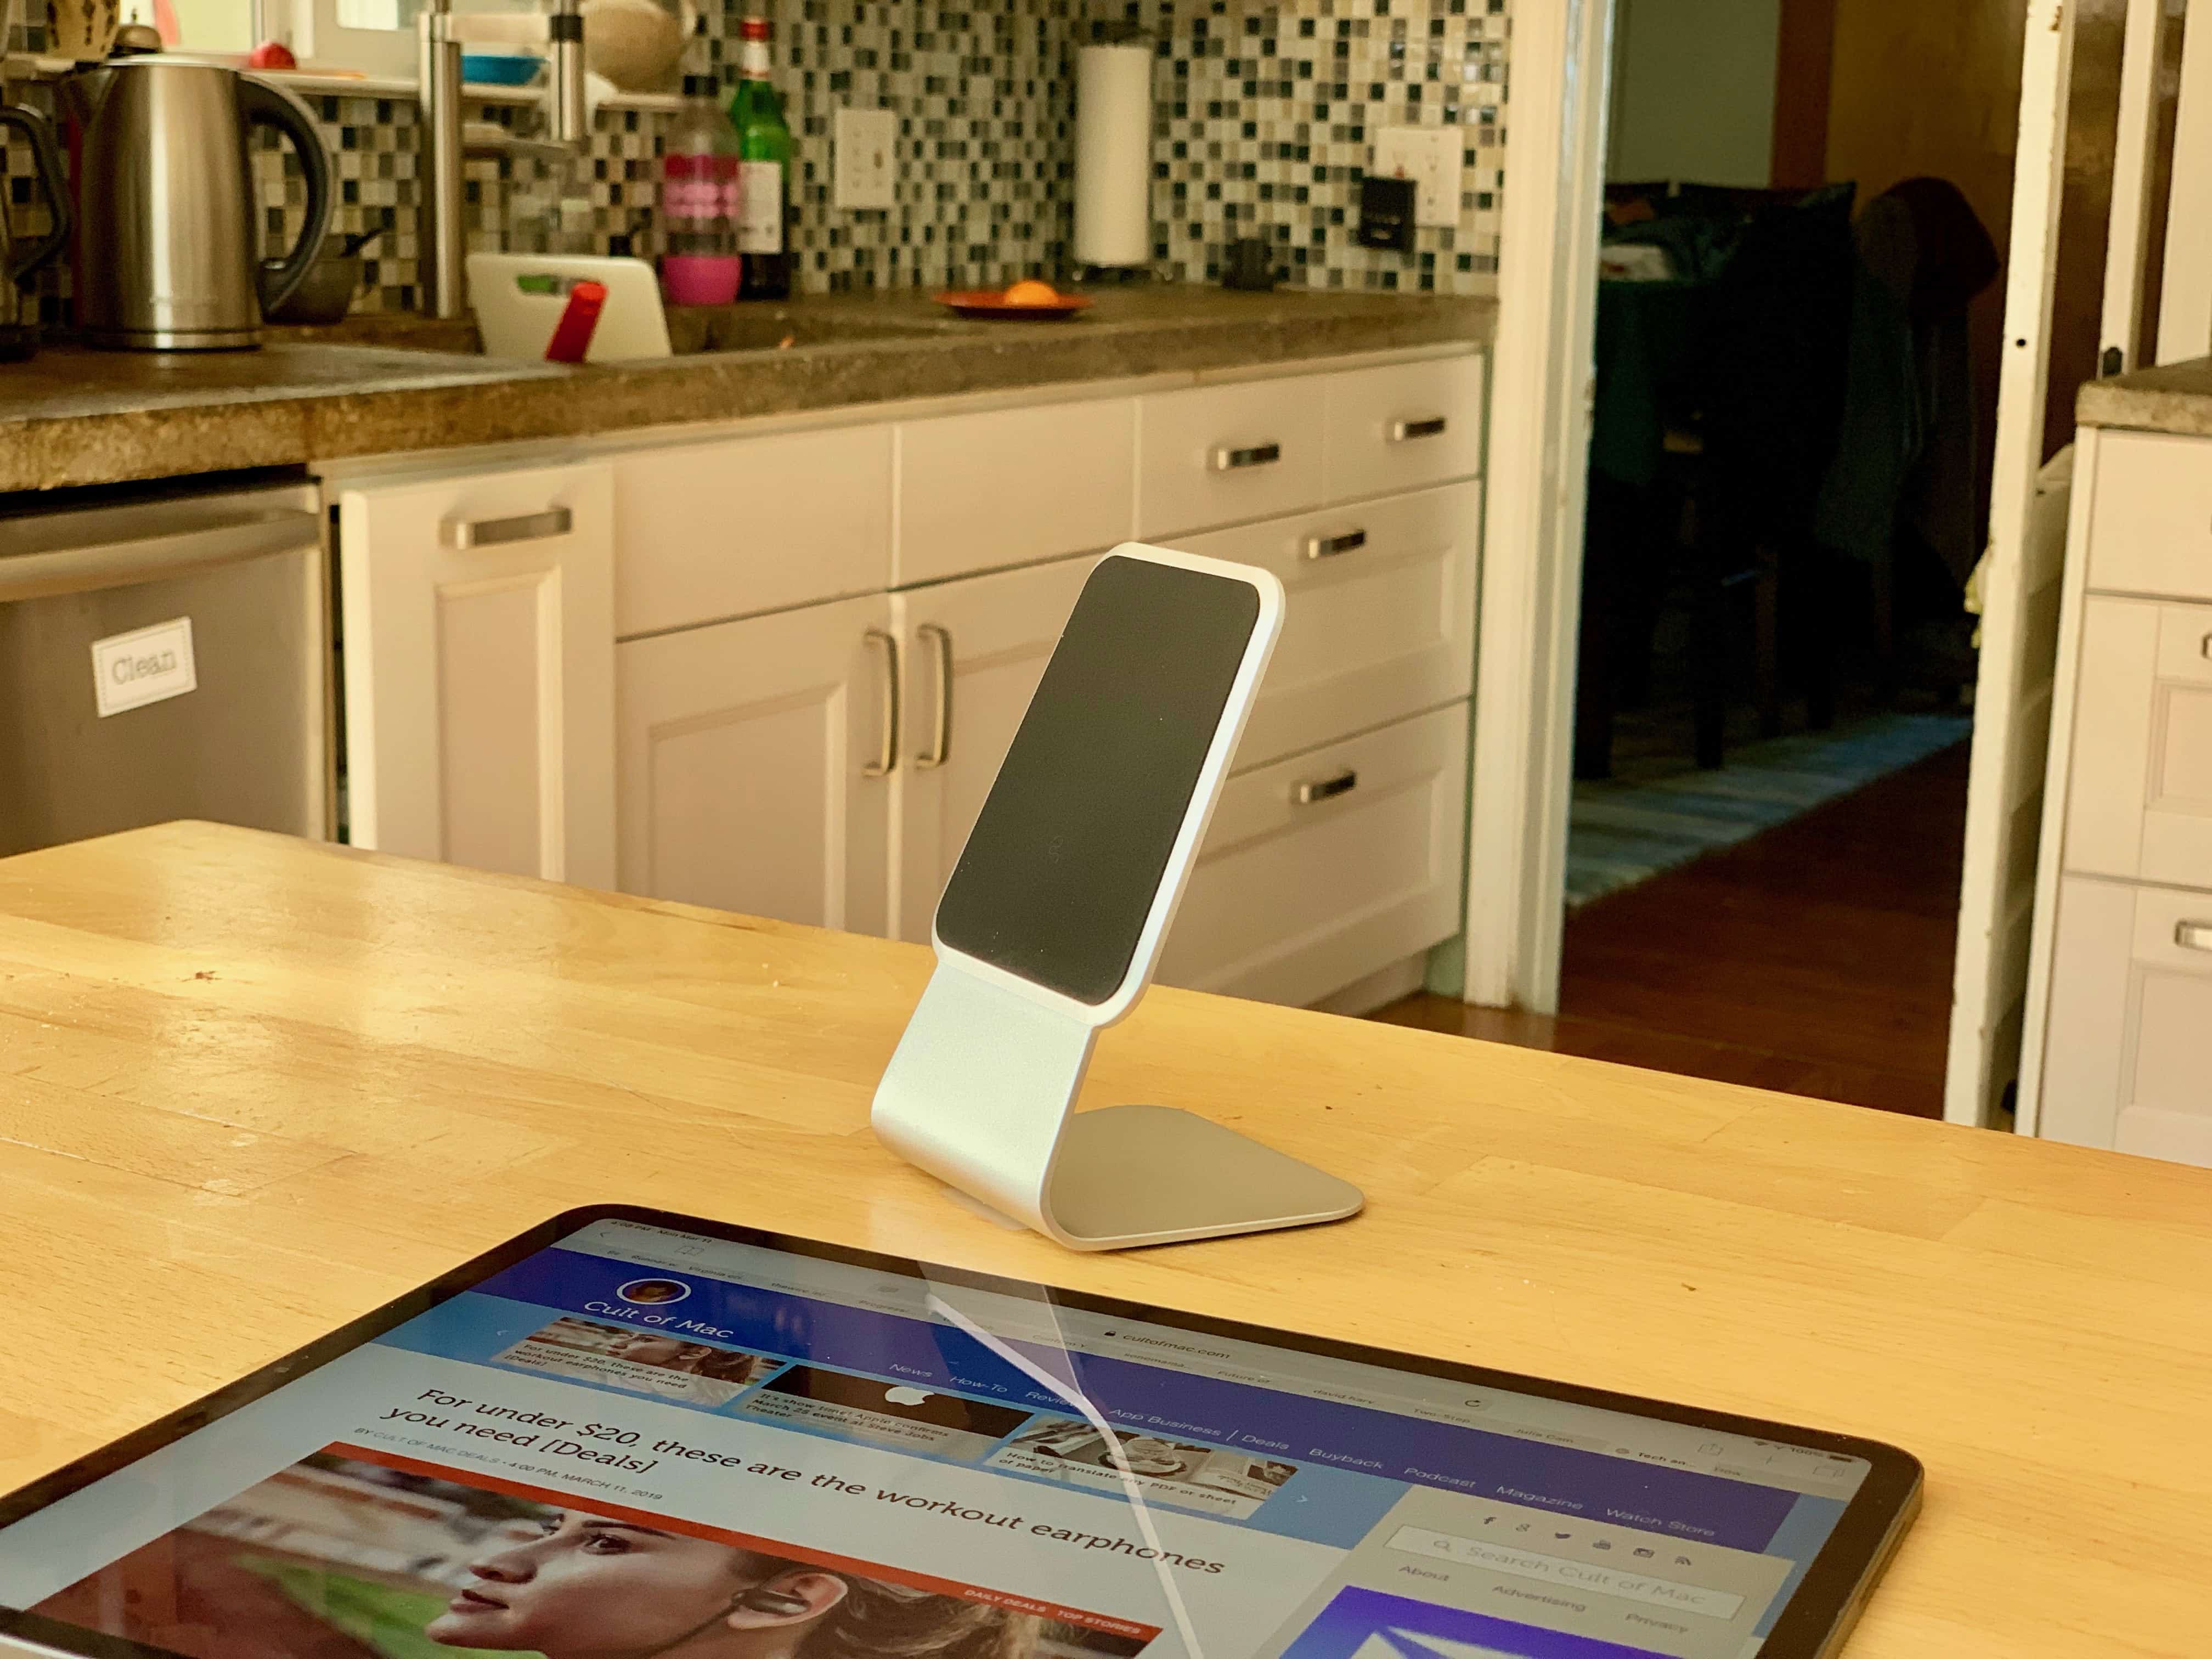 Wiplabs Slope review: This aluminum iPad stand has a sticky micro-suction pad to keep your iPad in place.